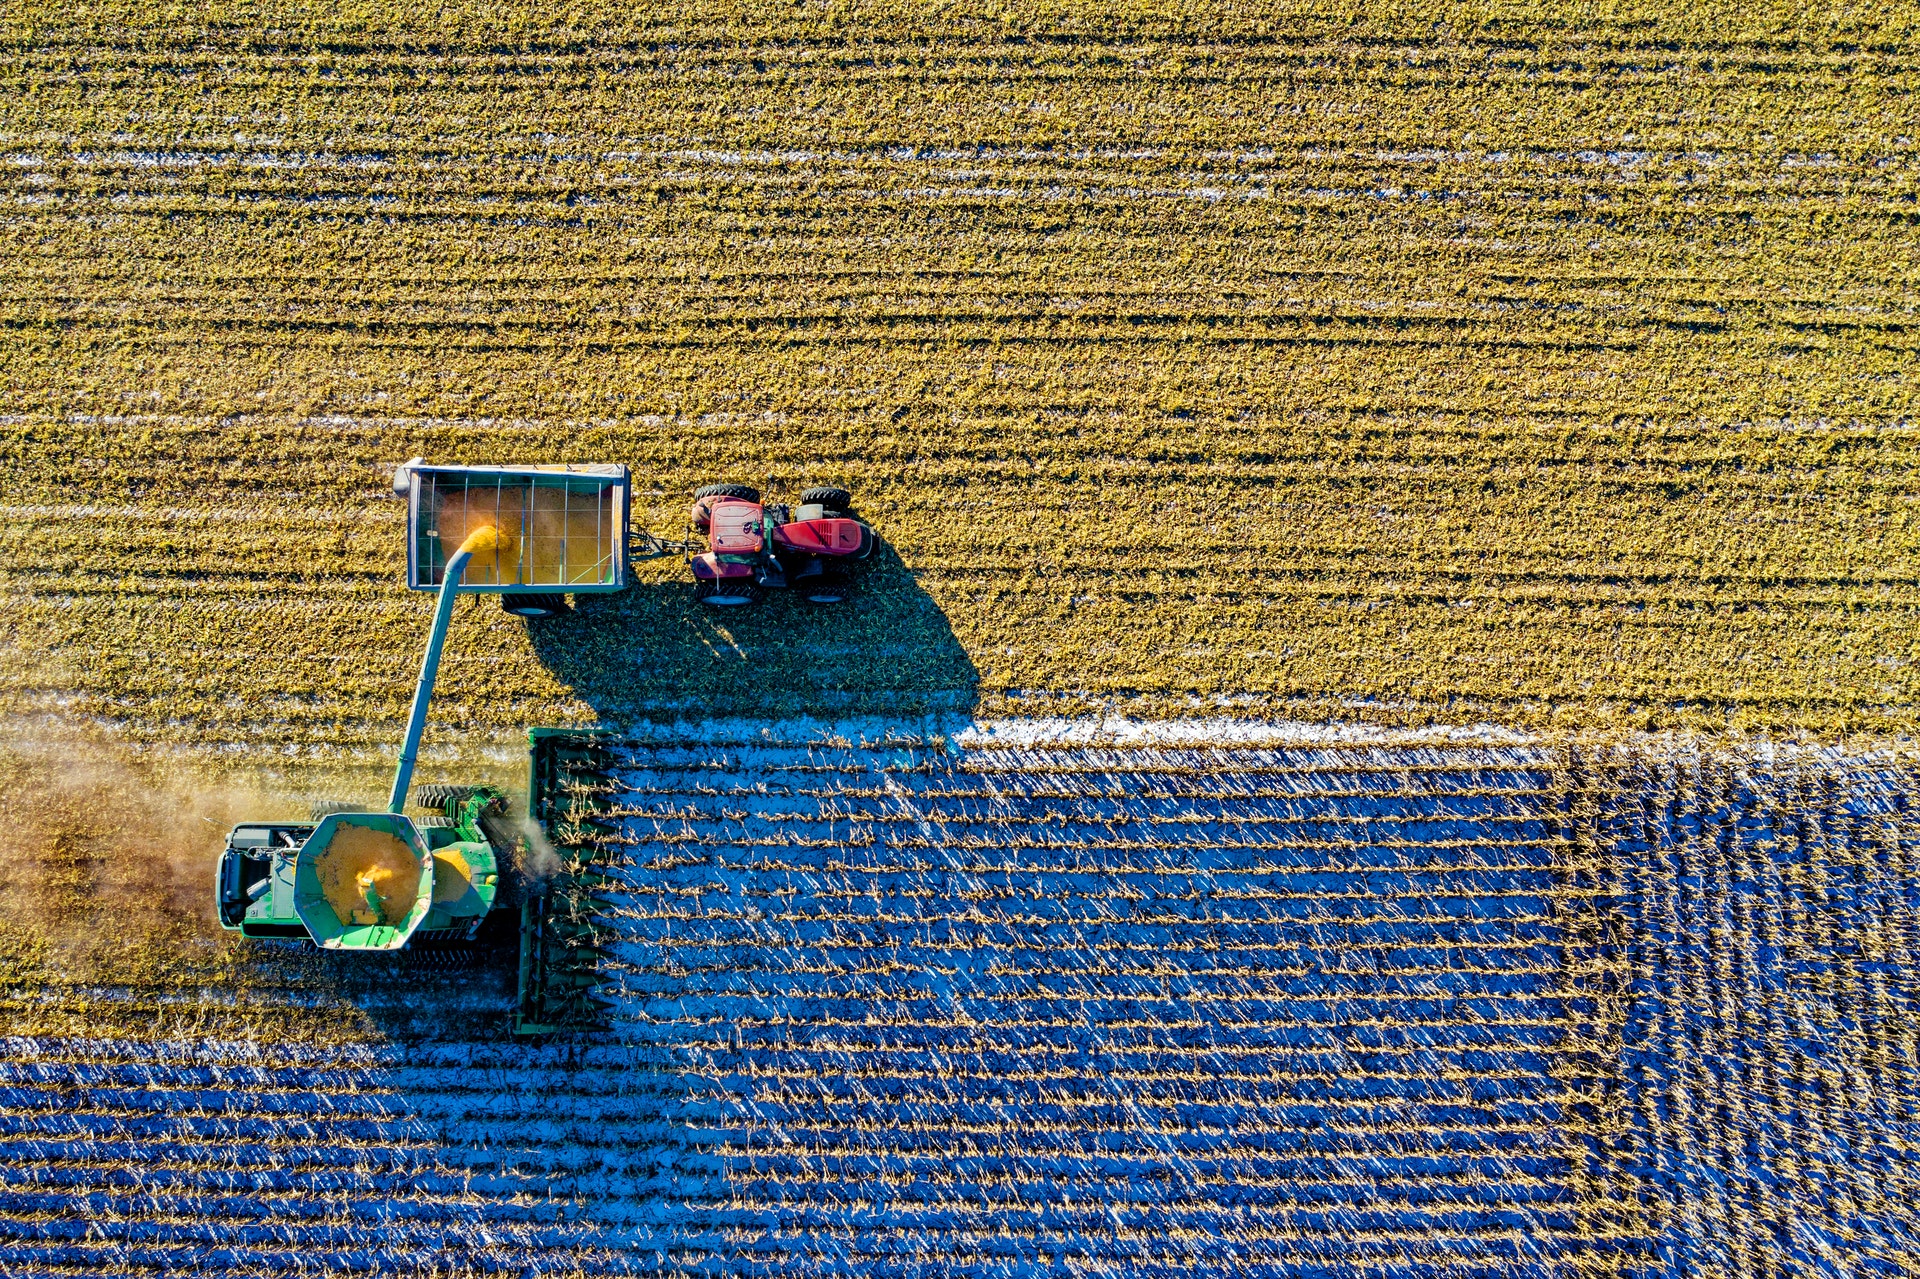 Tractor collecting crops